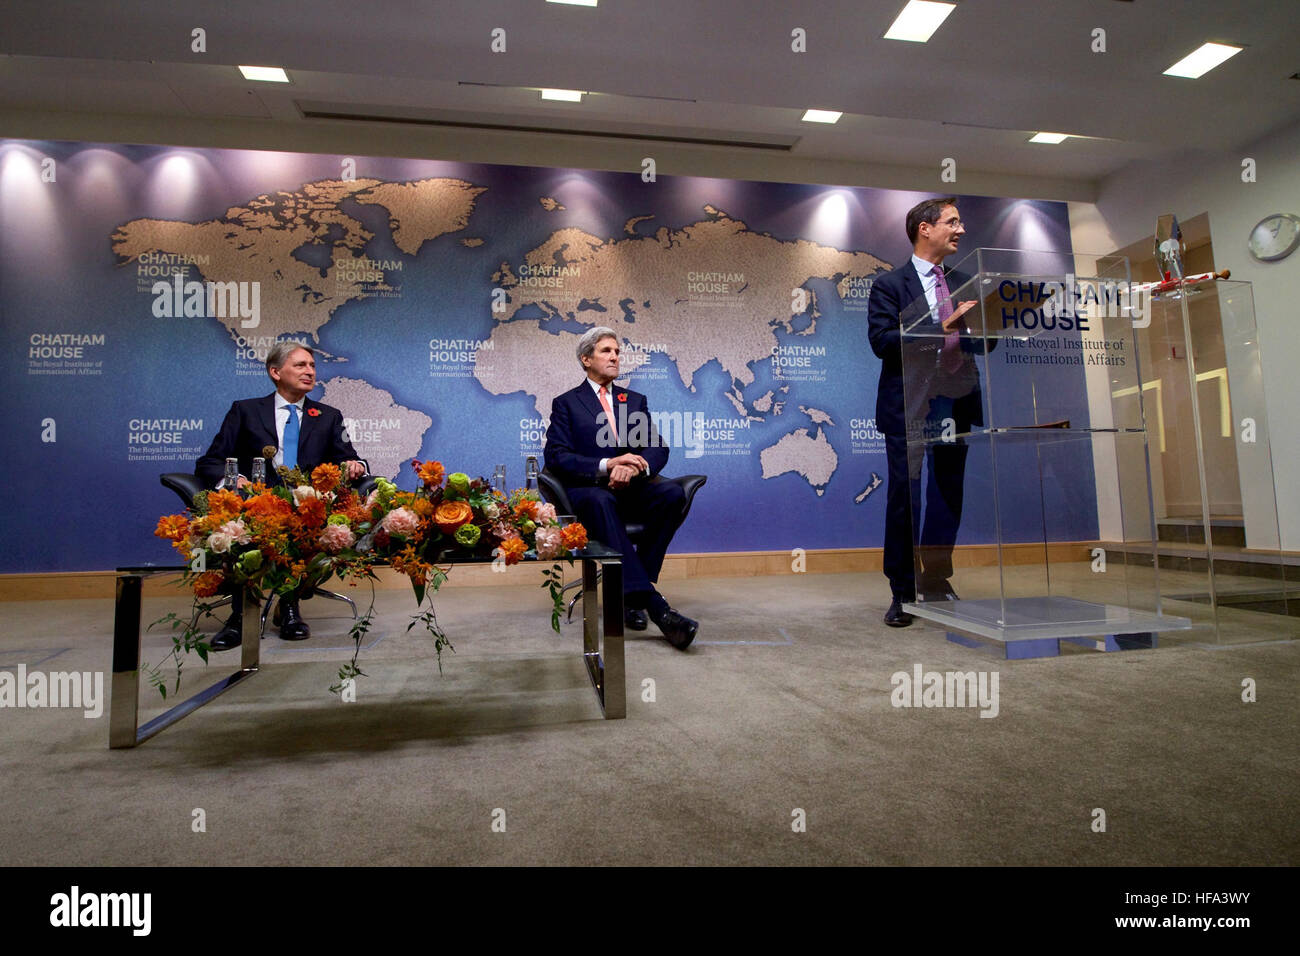 Chatham House Director Robin Niblett addresses U.S. Secretary of State John Kerry and his former counterpart, British Chancellor of the Exchequer Philip Hammond, before the Secretary and Iranian Foreign Minister Javad Zarif received the Chatham House Prize from the famed international think-tank in London, U.K., on October 31, 2016. Stock Photo